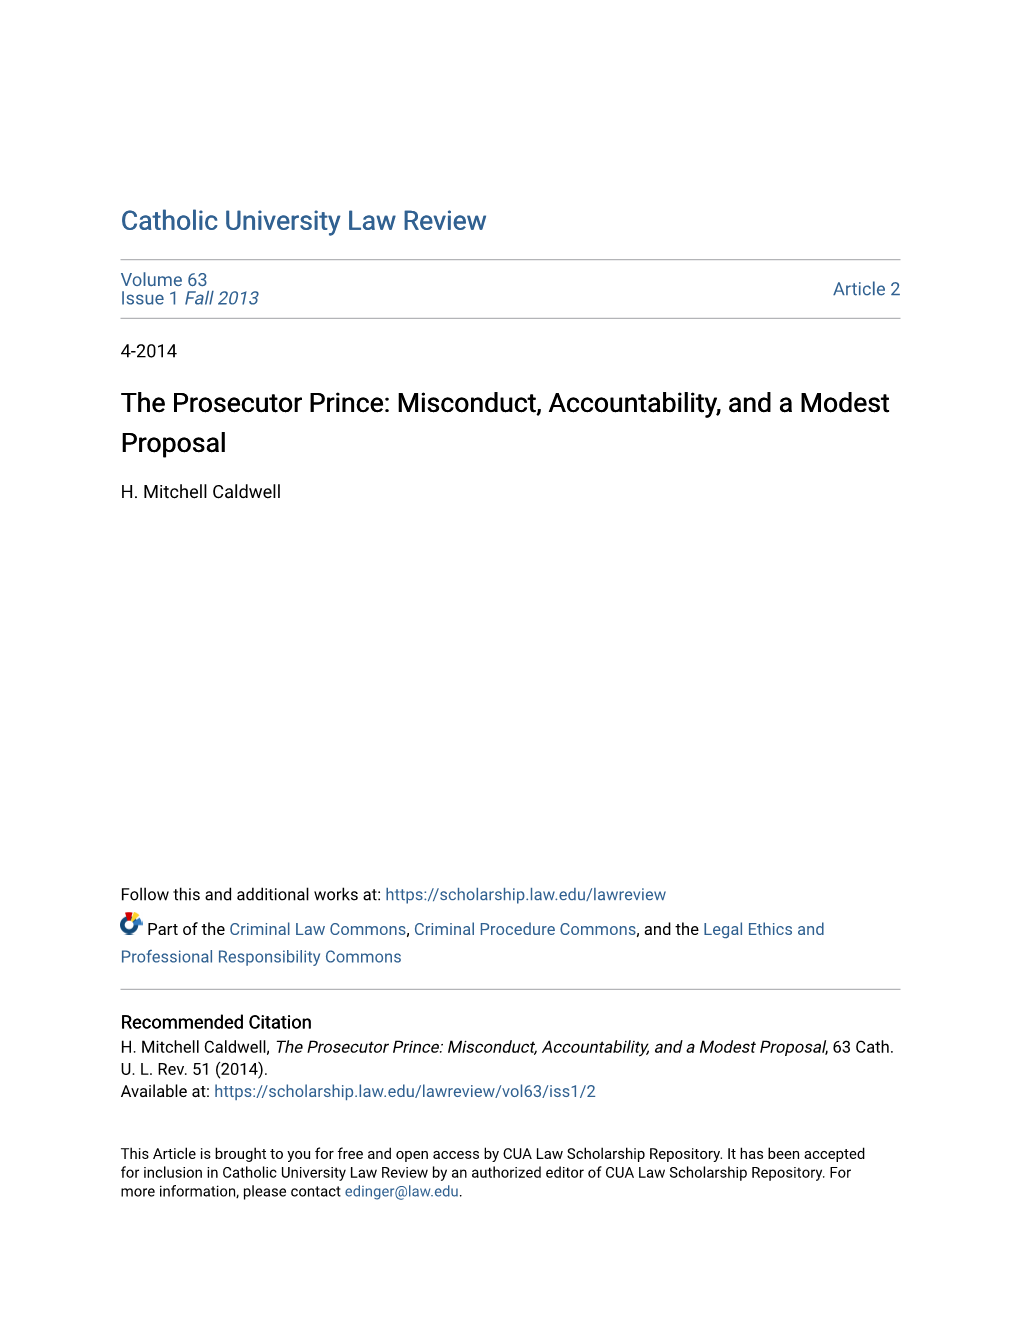 The Prosecutor Prince: Misconduct, Accountability, and a Modest Proposal